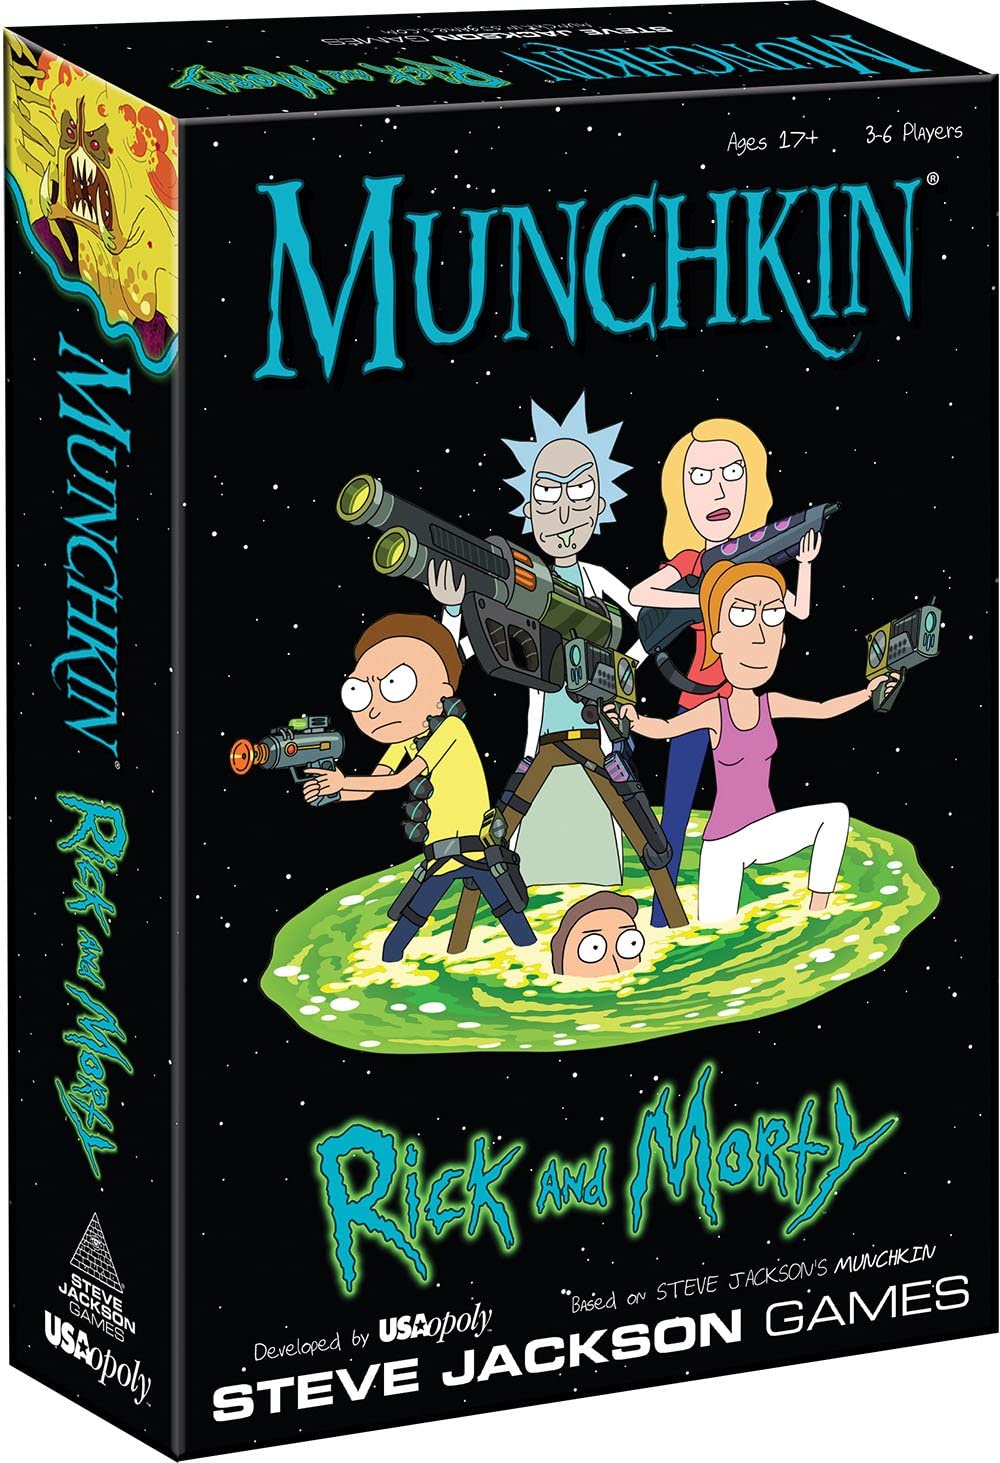 rick and morty adult swim games